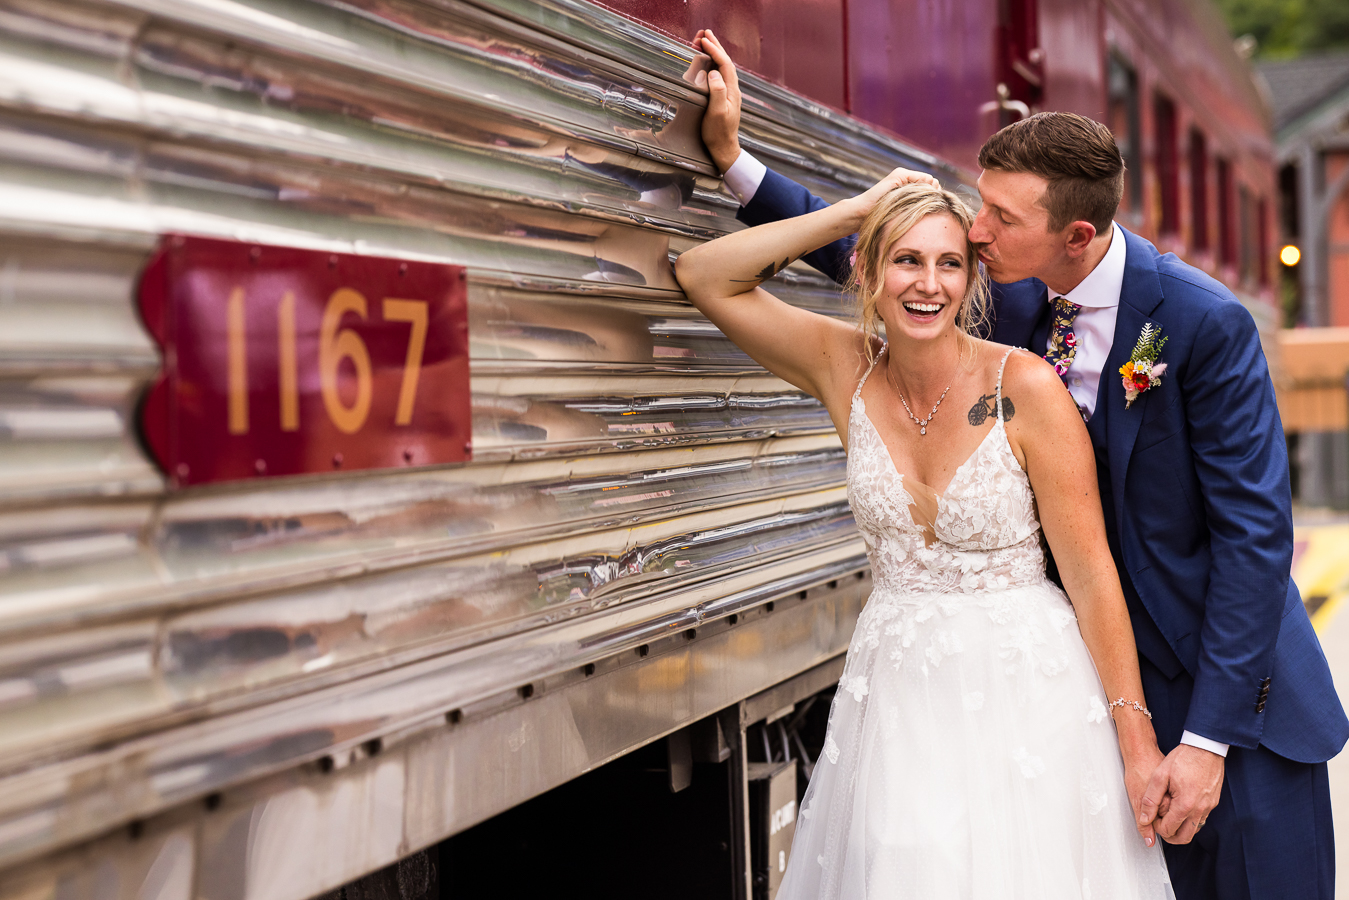 Jim Thorpe Wedding Photographer, lisa rhinehart, captures this fun, creative image of the bride standing against the train car as the groom kisses her on the forehead after their wedding ceremony